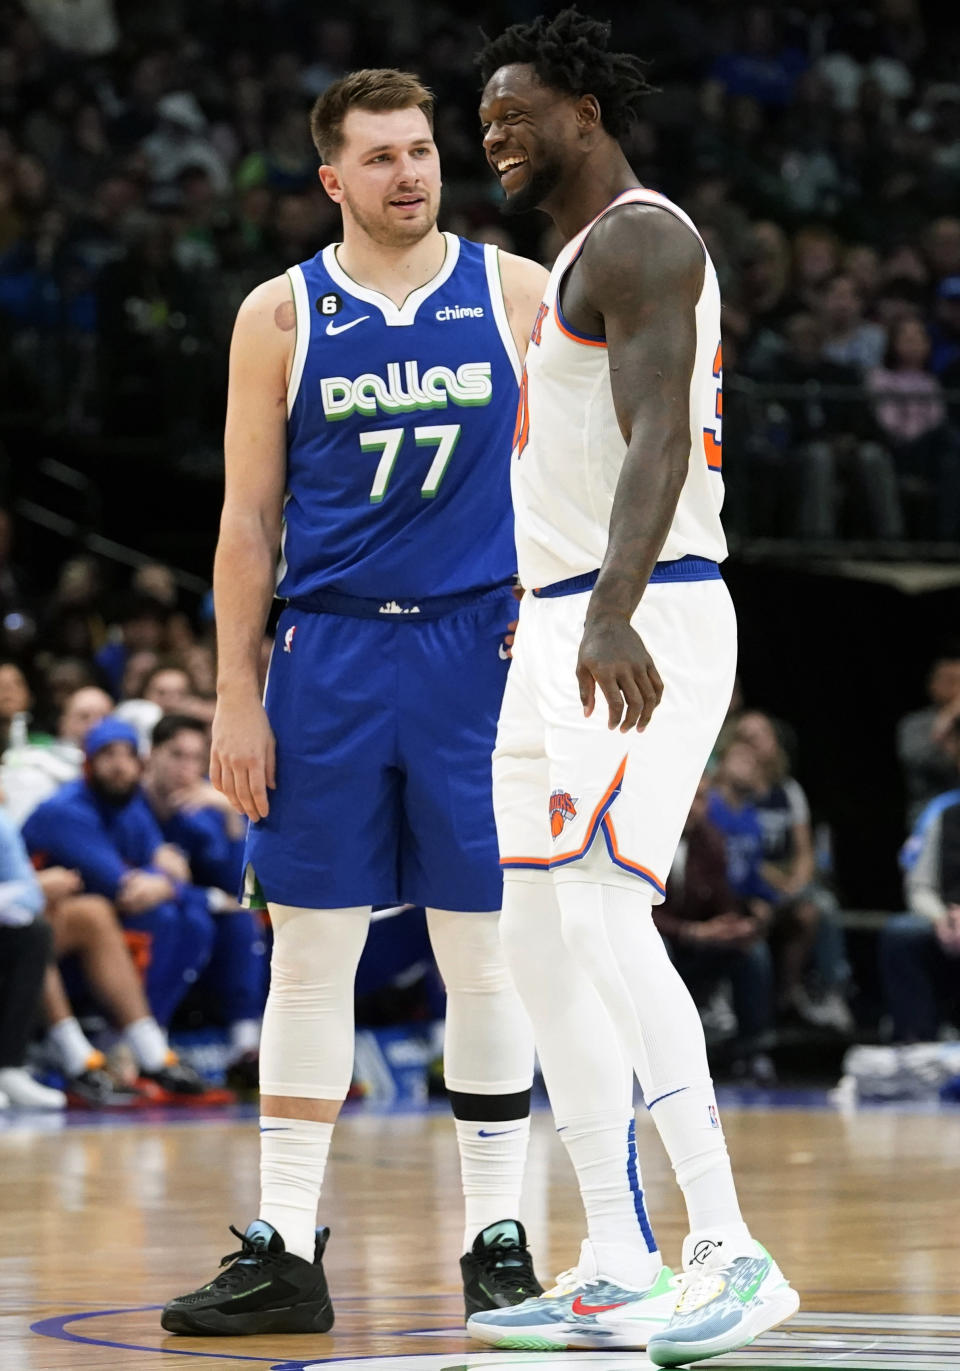 New York Knicks forward Julius Randle (30) and Dallas Mavericks guard Luka Doncic (77) laugh while standing at half-court during the first half of an NBA basketball game in Dallas, Tuesday, Dec. 27, 2022. (AP Photo/LM Otero)